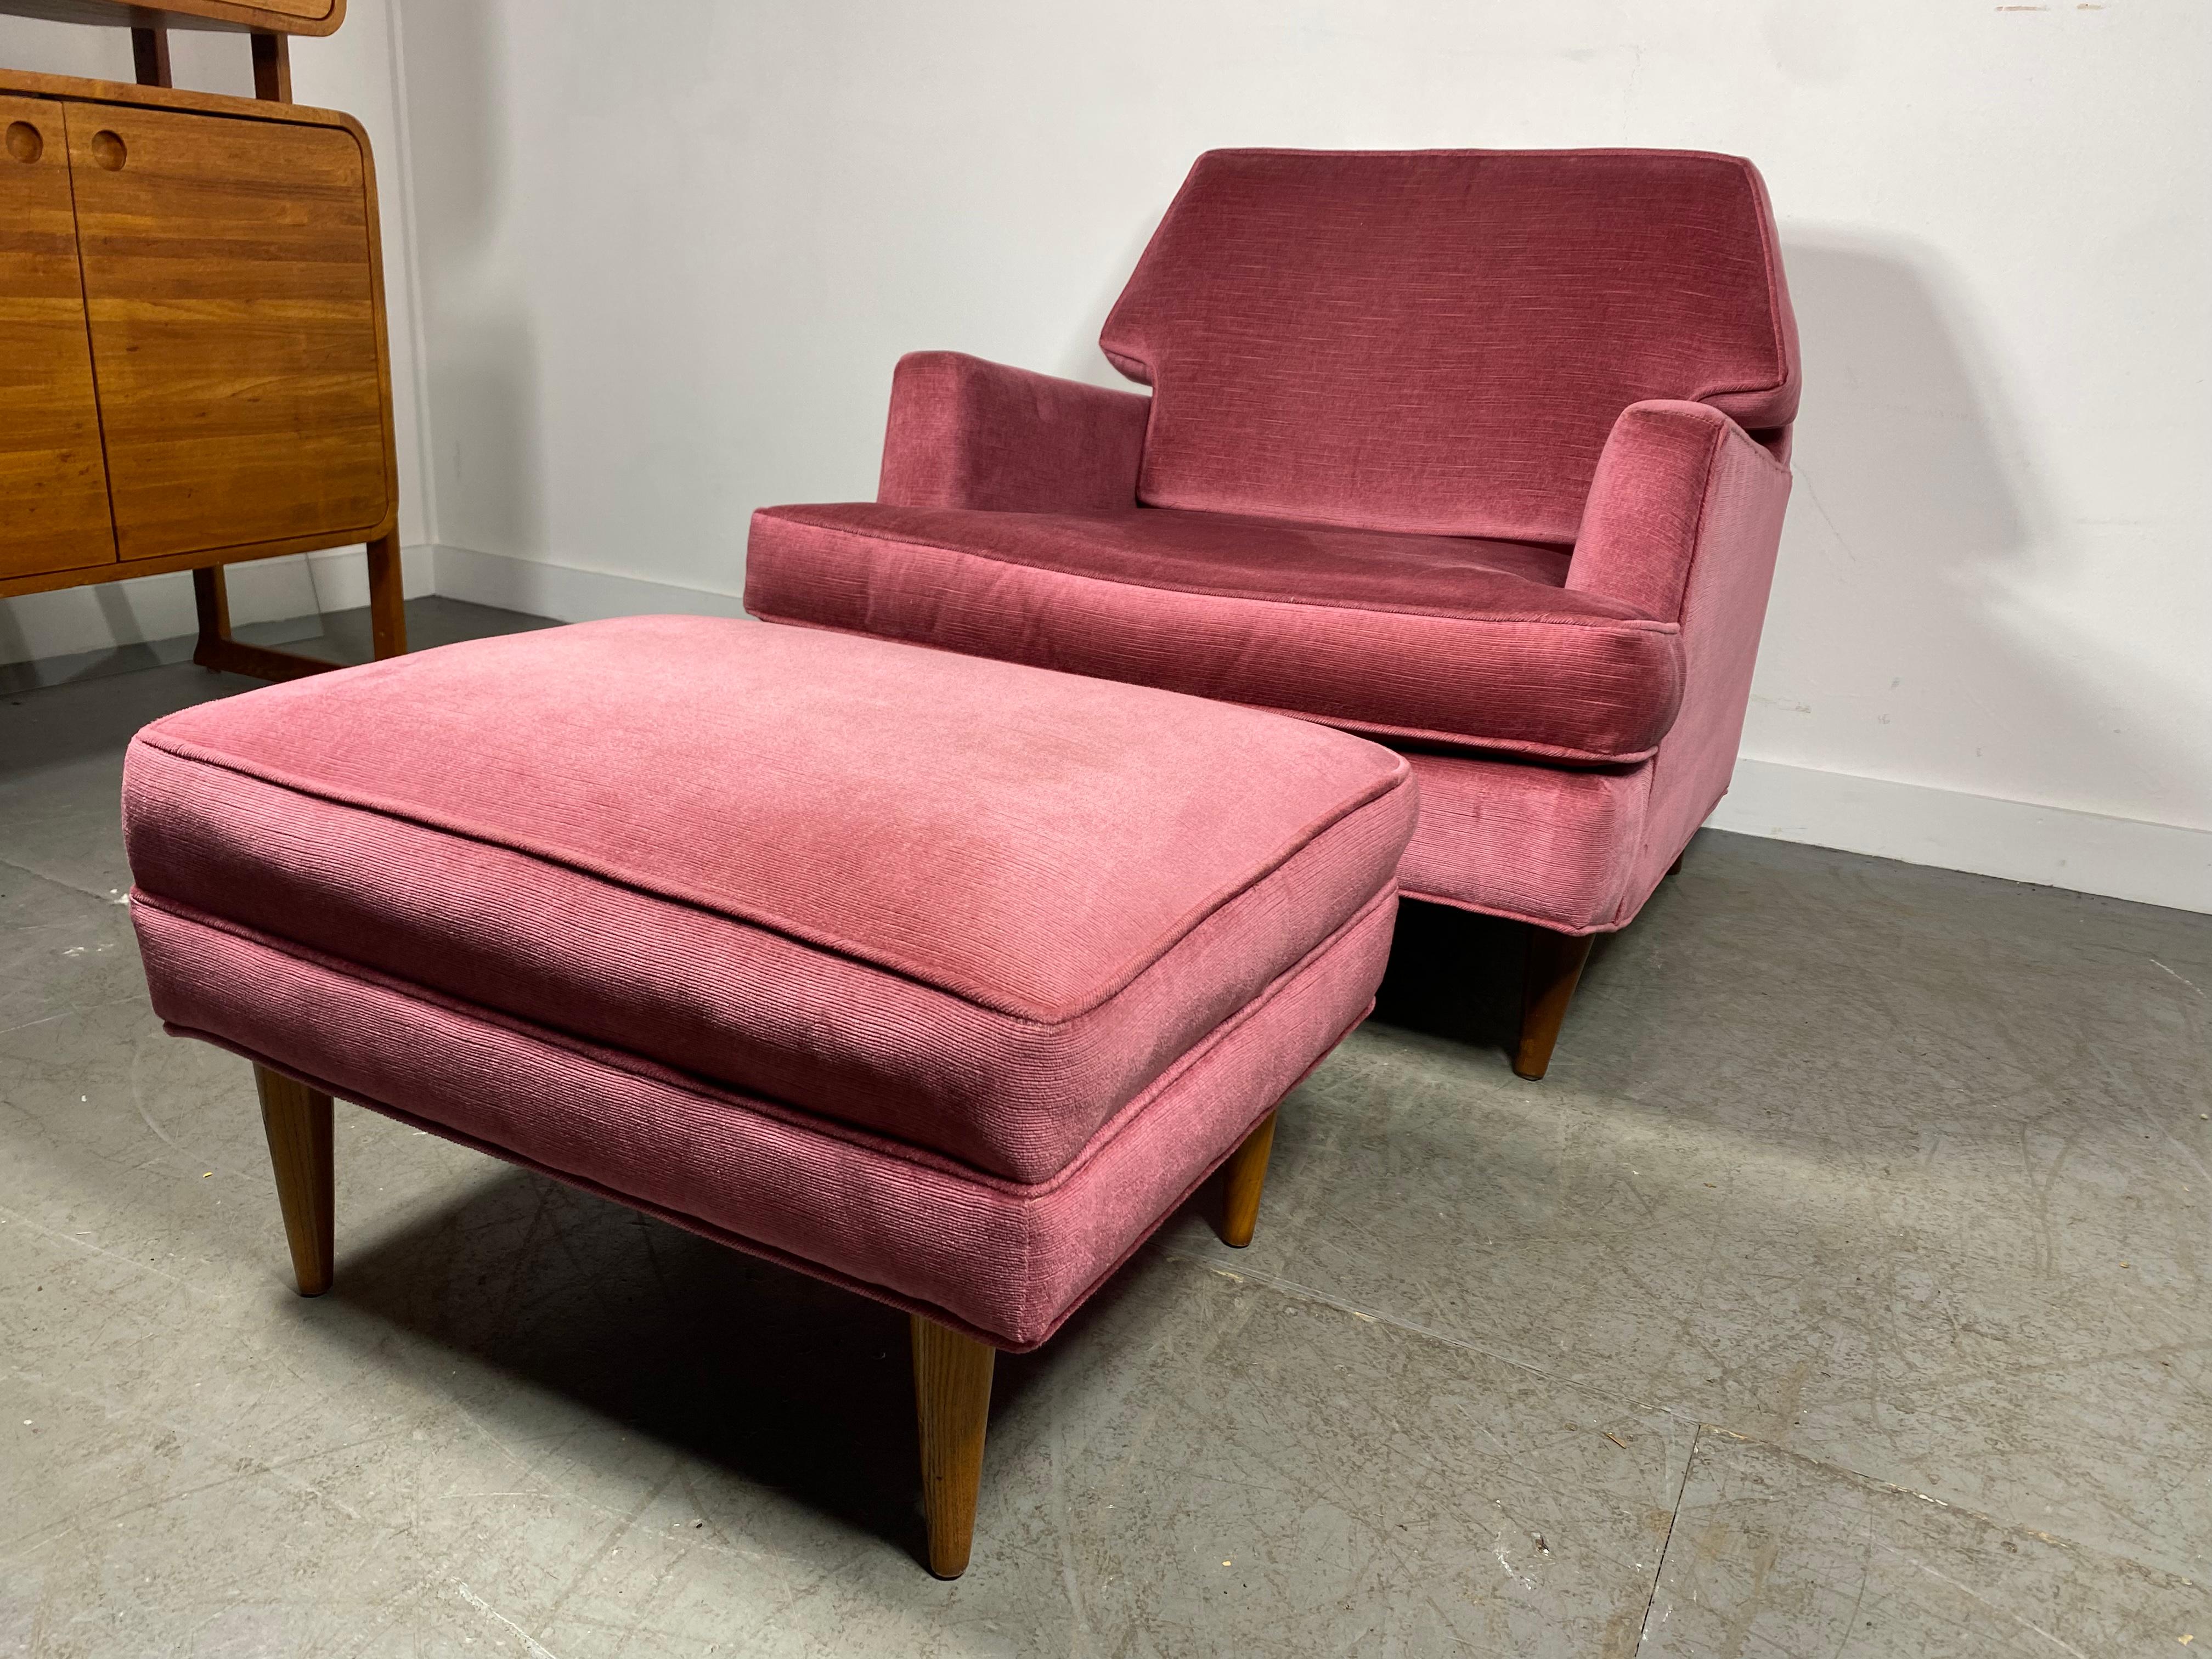 Stunning Modernist Lounge Chair & Ottoman designed by Roger Springer for Dunbar,, Classic style and design,, As fresh today as when it was designed 70 years ago,, Newly upholstered,, Extremely comfortable,,Superior quality and construction.. Hand